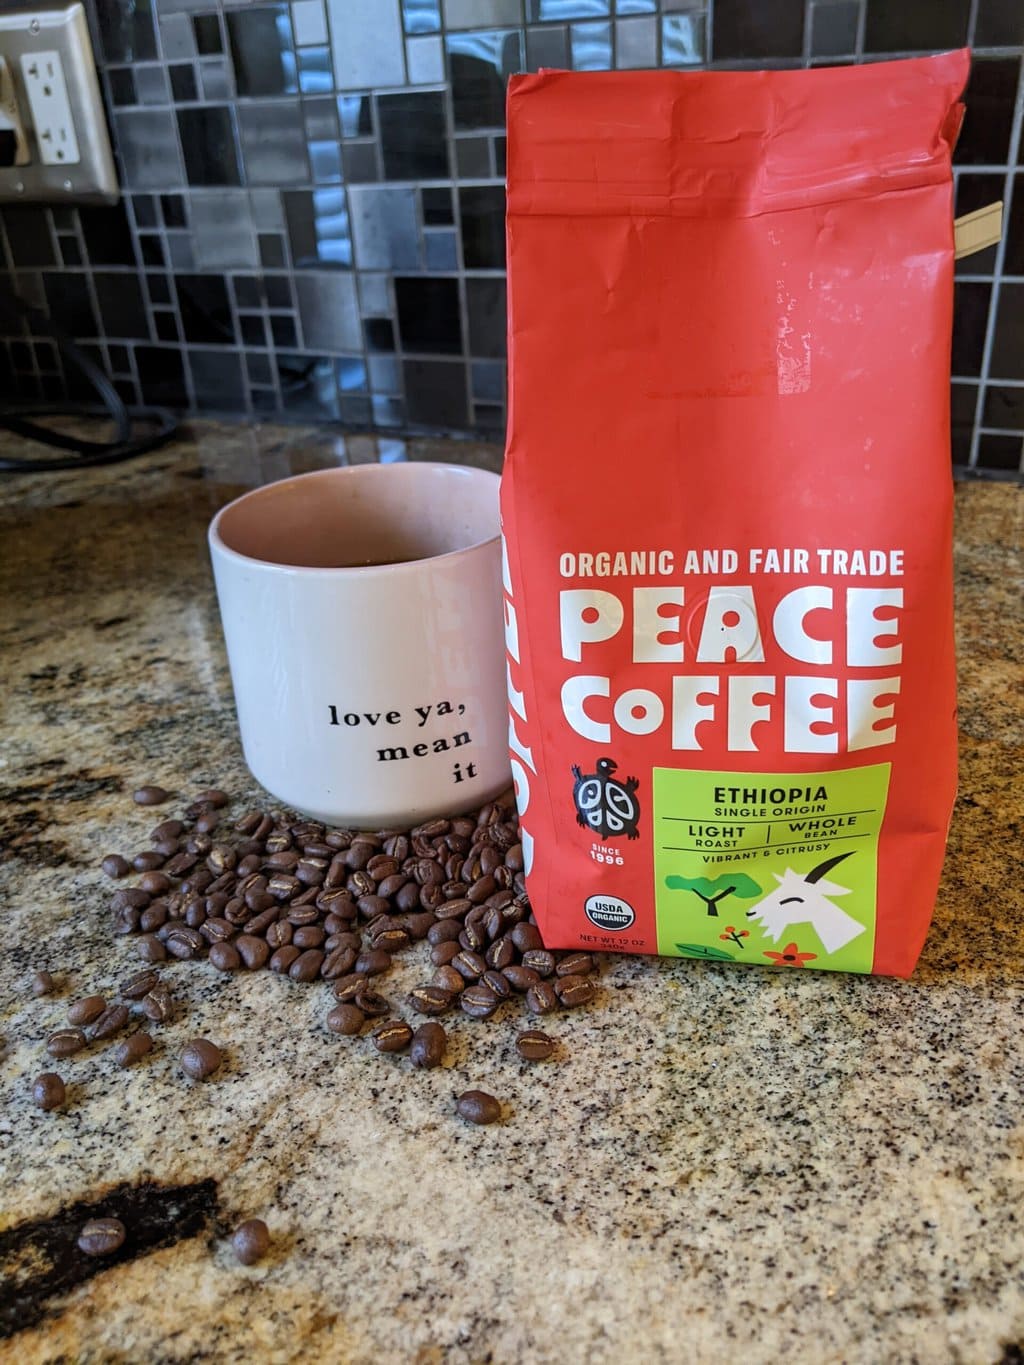 Peace Coffee Ethiopia Single Origin Light Roast next to a brewed cup of coffee and scattered coffee beans